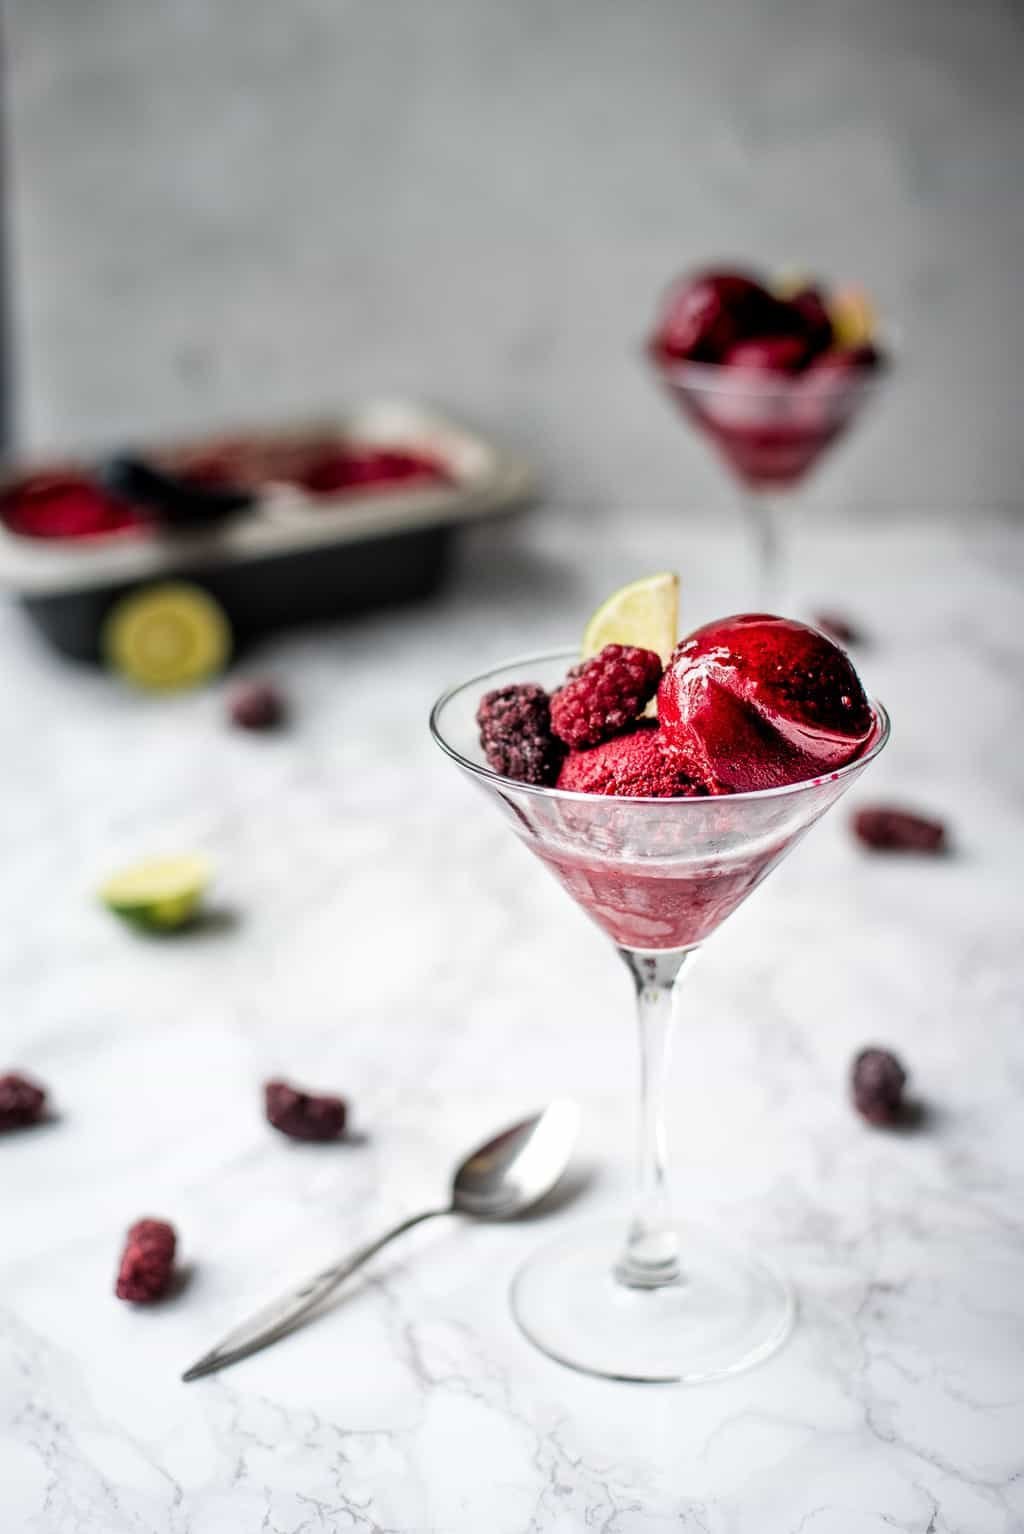 Creative Dessert Recipes That Are All About Berries